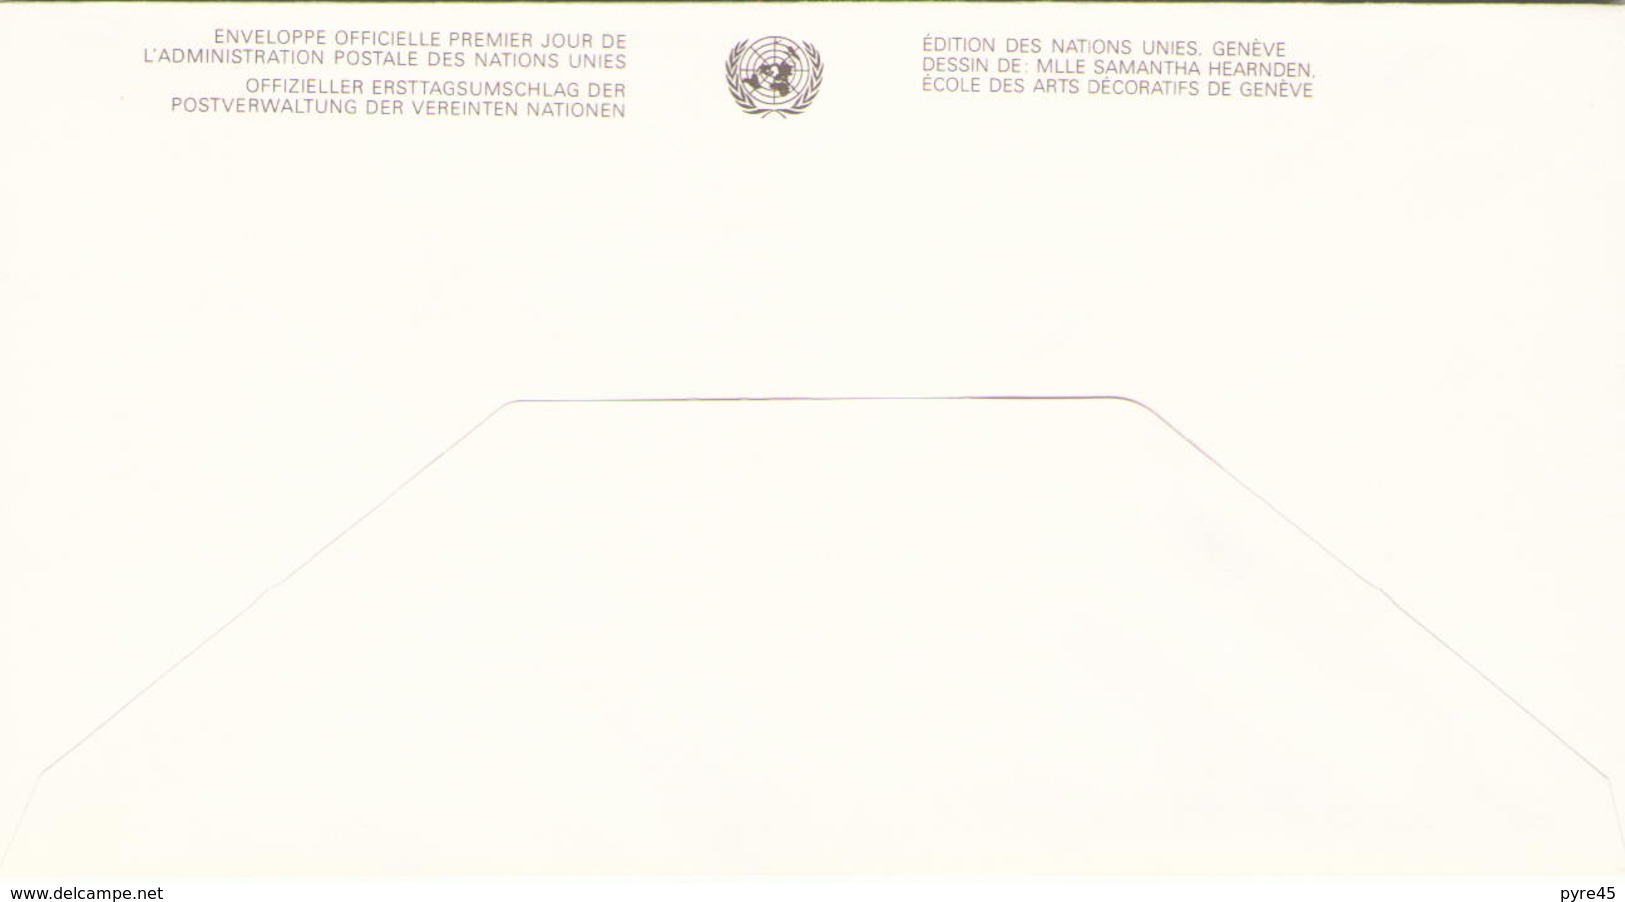 NATIONS UNIES FDC DU 10 MAI 1991 NEW YORK NAMIBIE NAISSANCE D UNE NATION - Covers & Documents